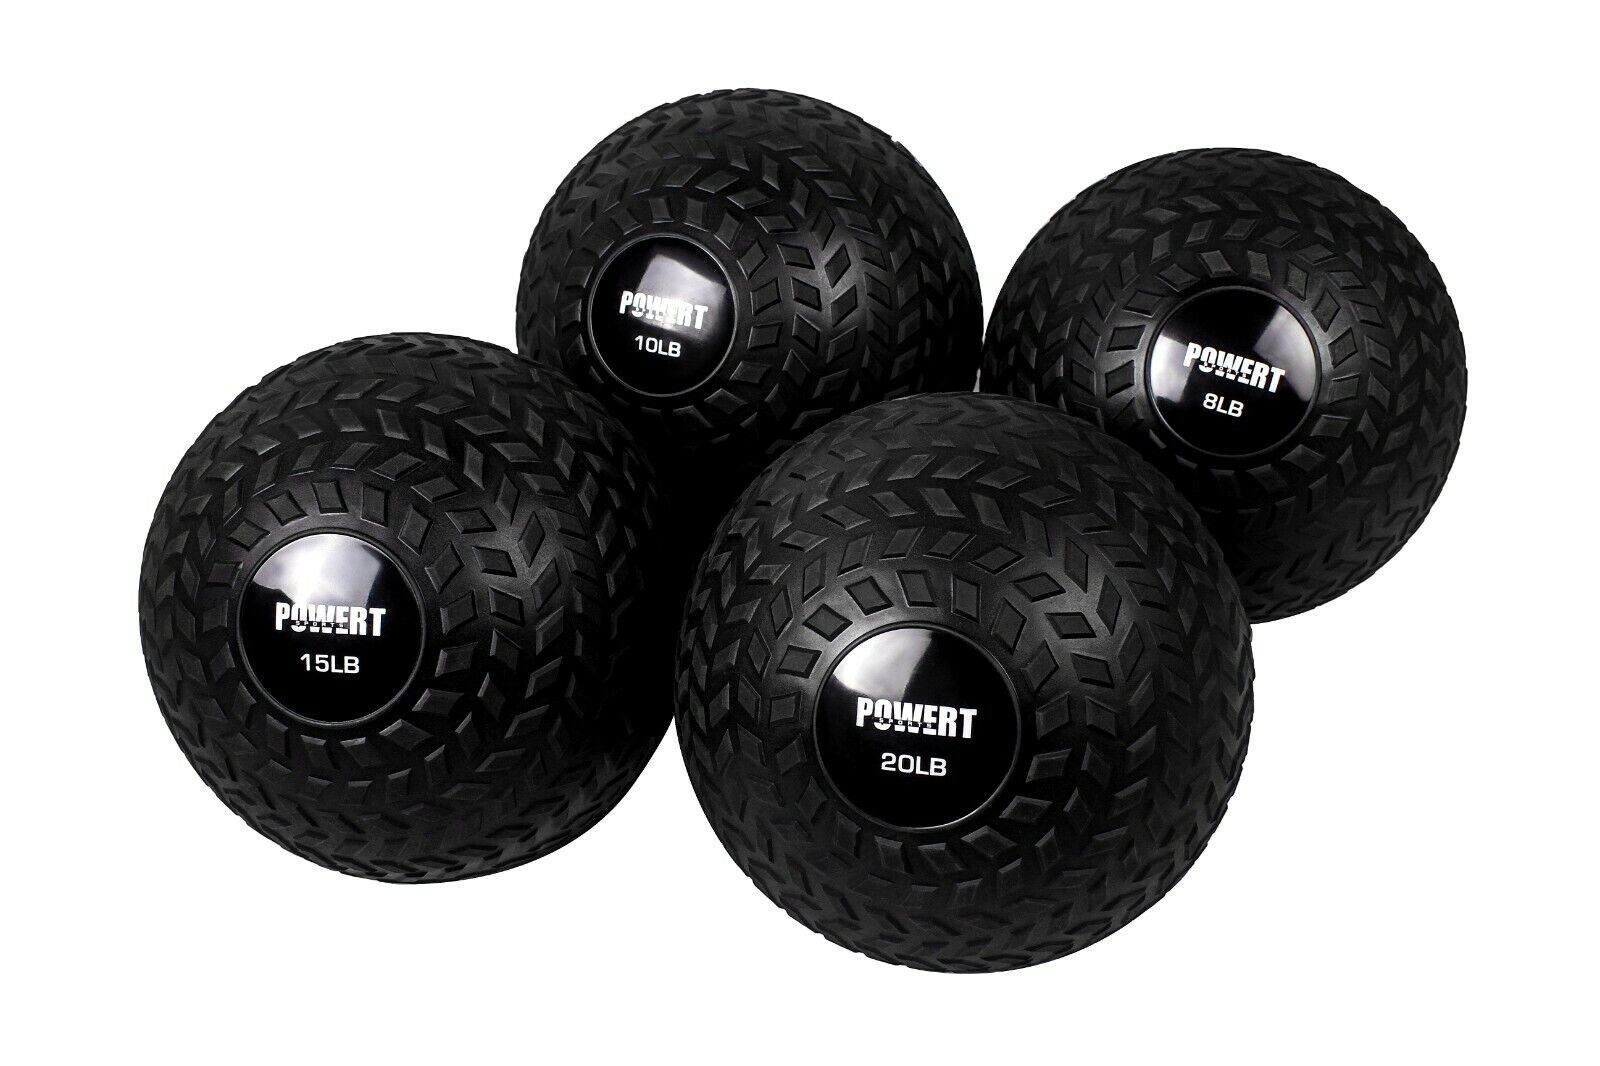 Powert Slam Weighted Medicine Ball Core Muscle Cardio Workout Fitness Exercise